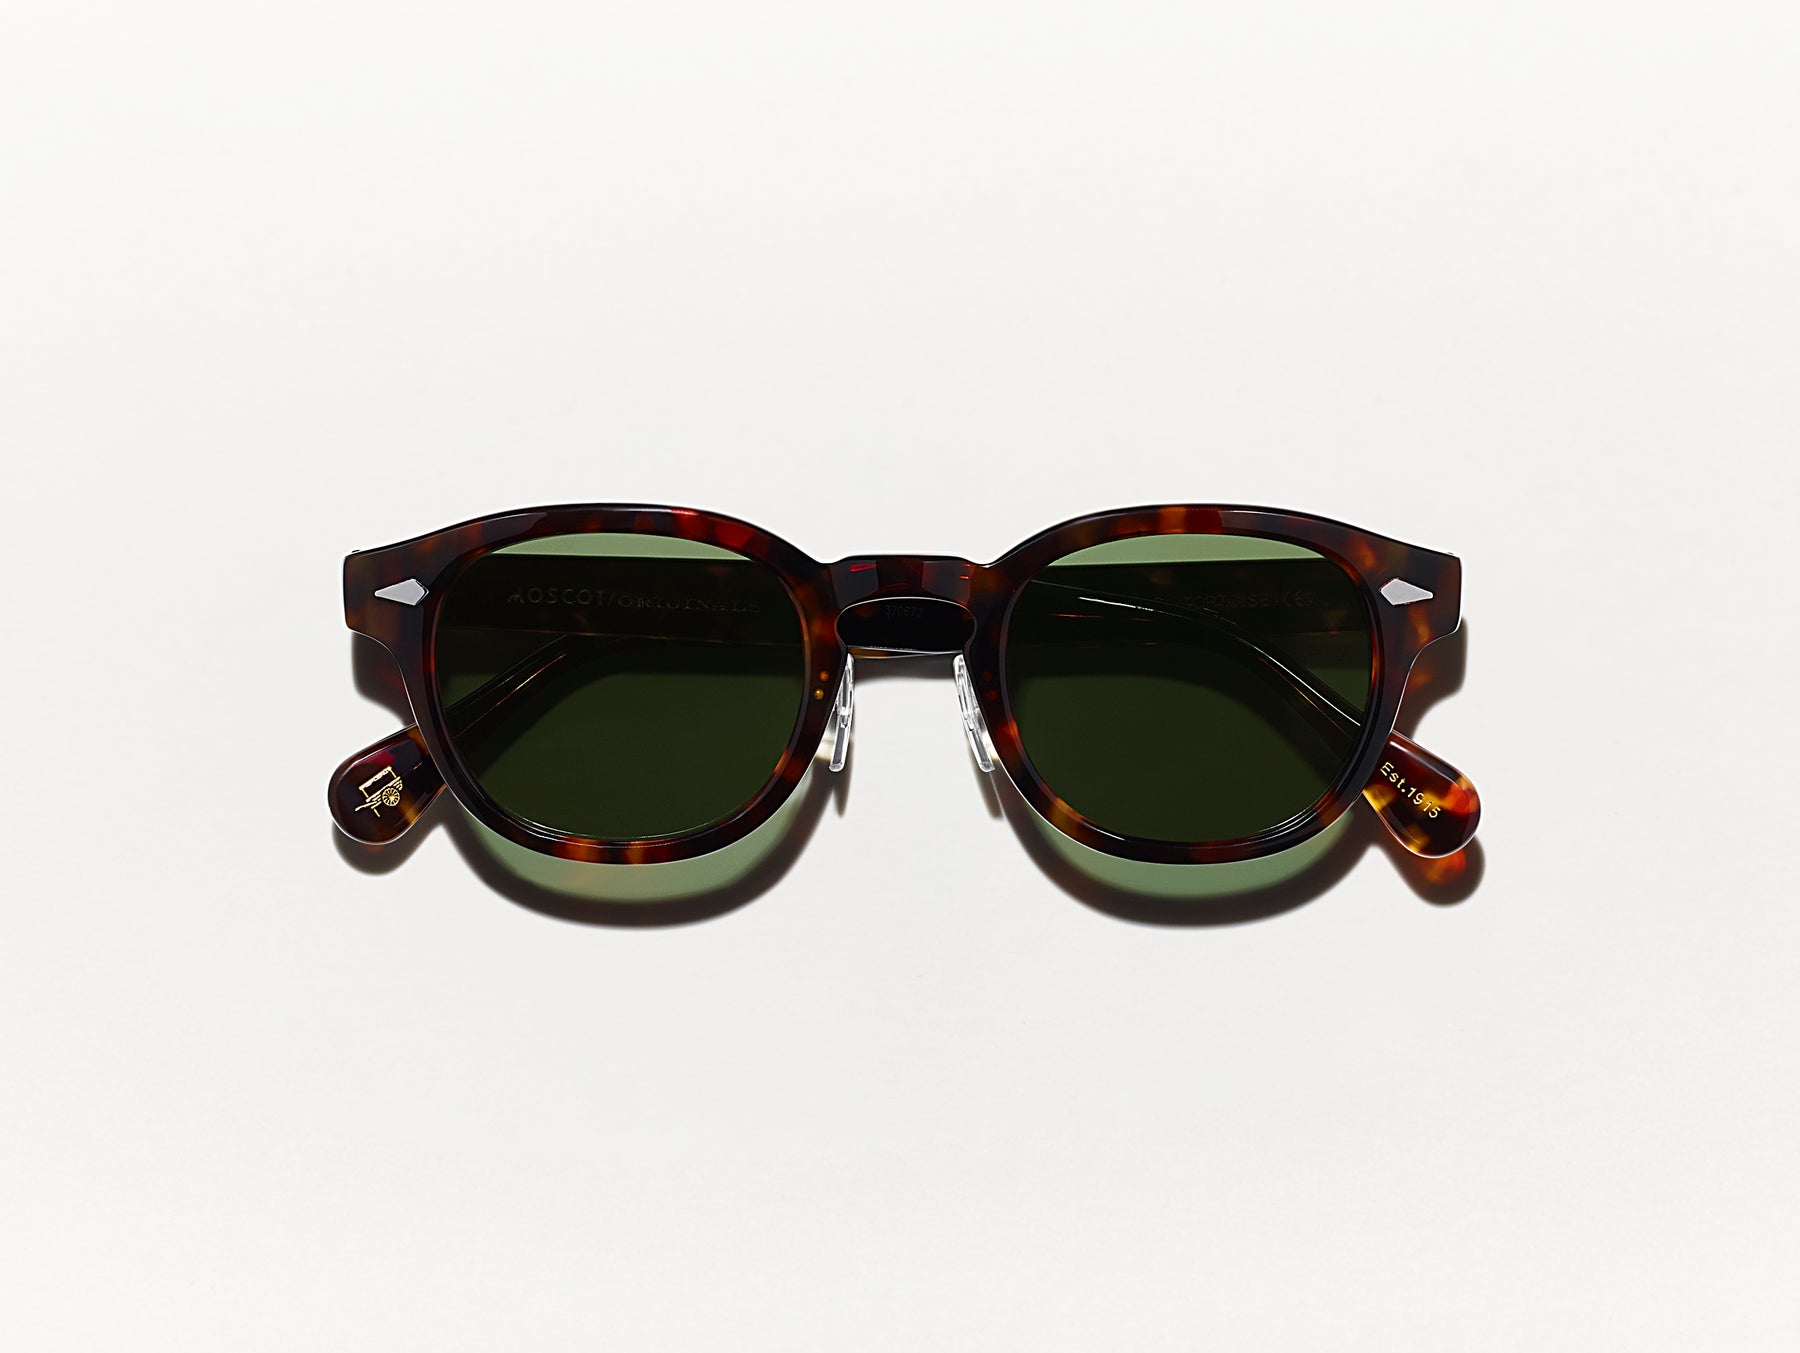 The LEMTOSH SUN with Metal Nose Pads in Tortoise with G-15 Glass Lenses